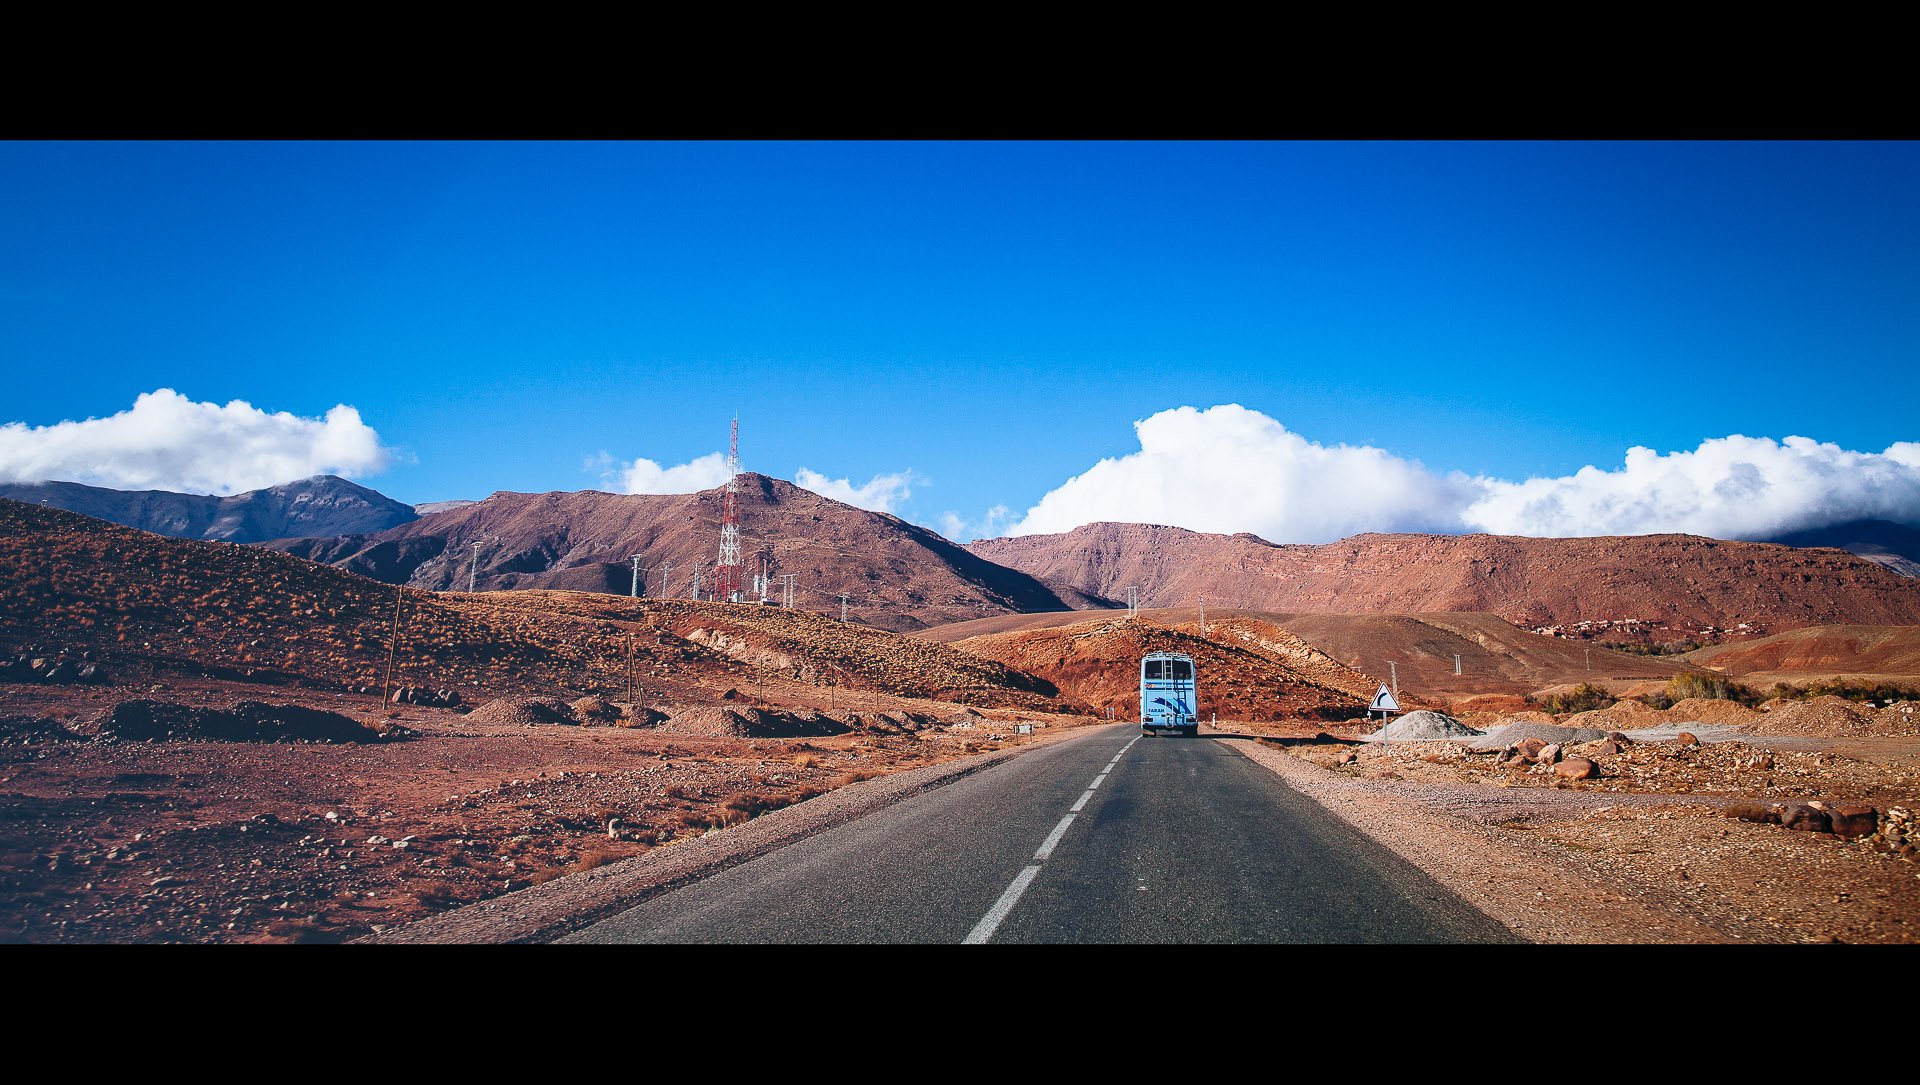 A highway in the Moroccan high atlas, with a bus in the background